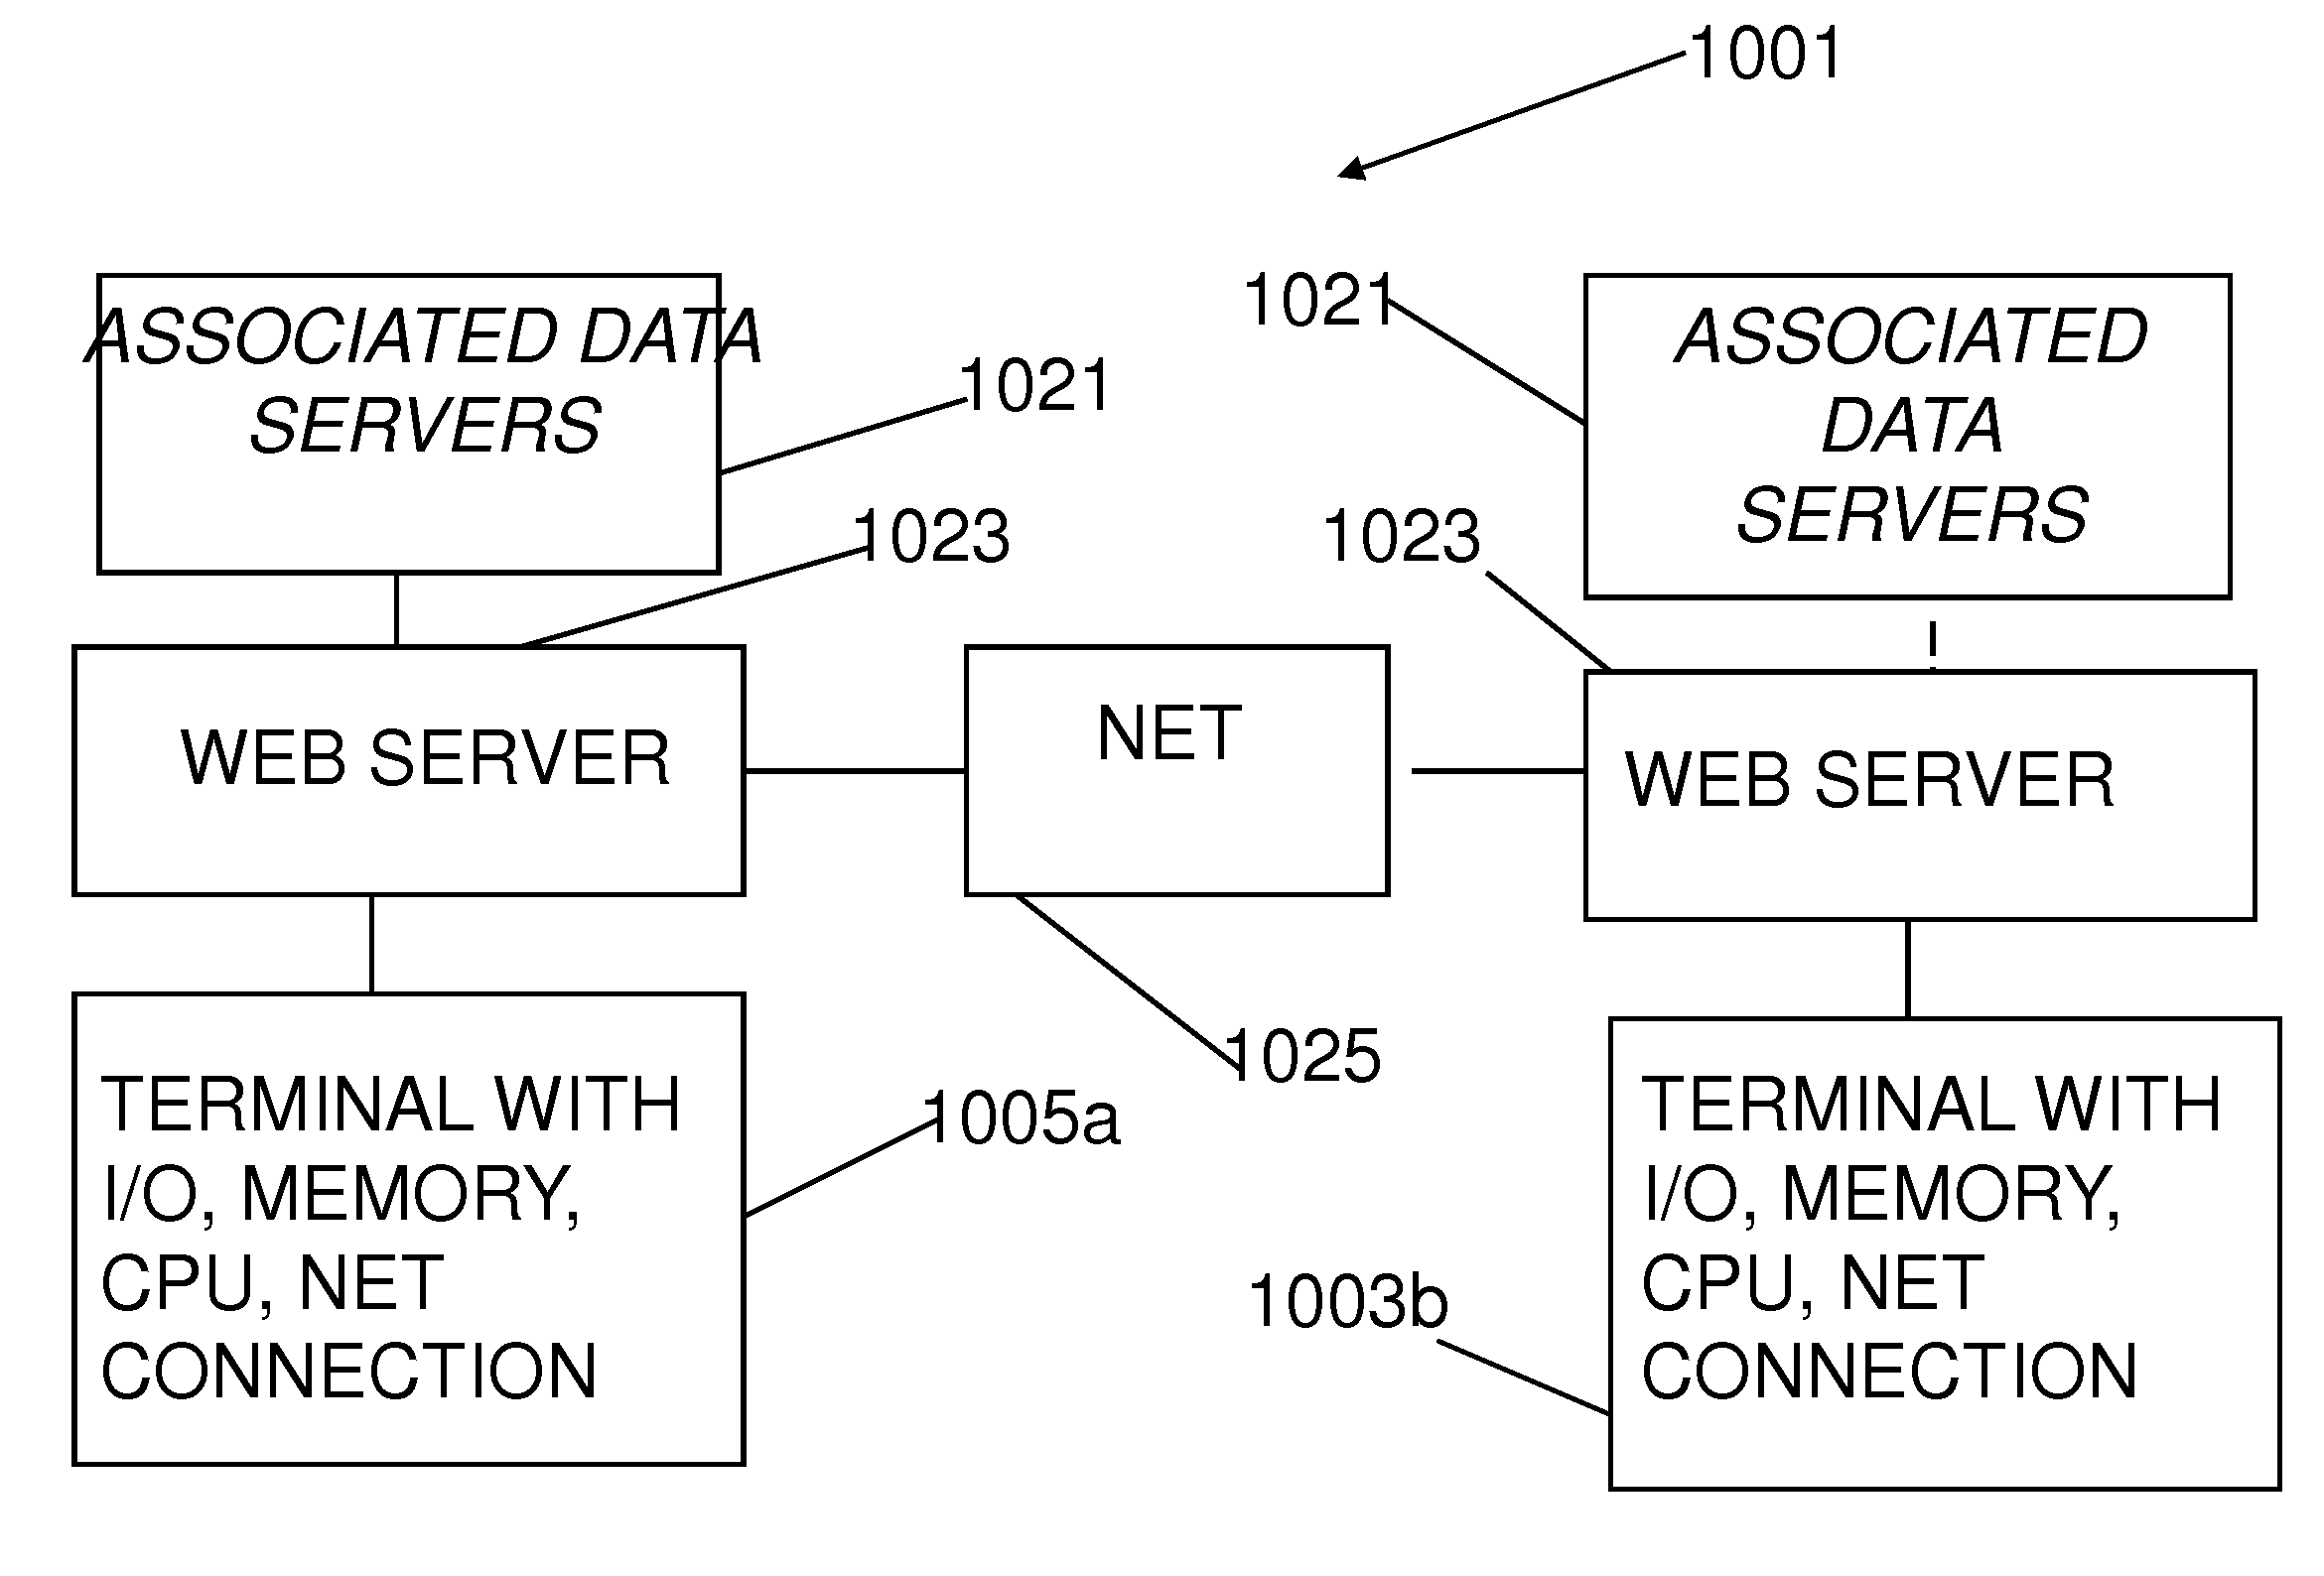 Shipping container based production and logistics management method and system including order entry, tracking, and fullfilment